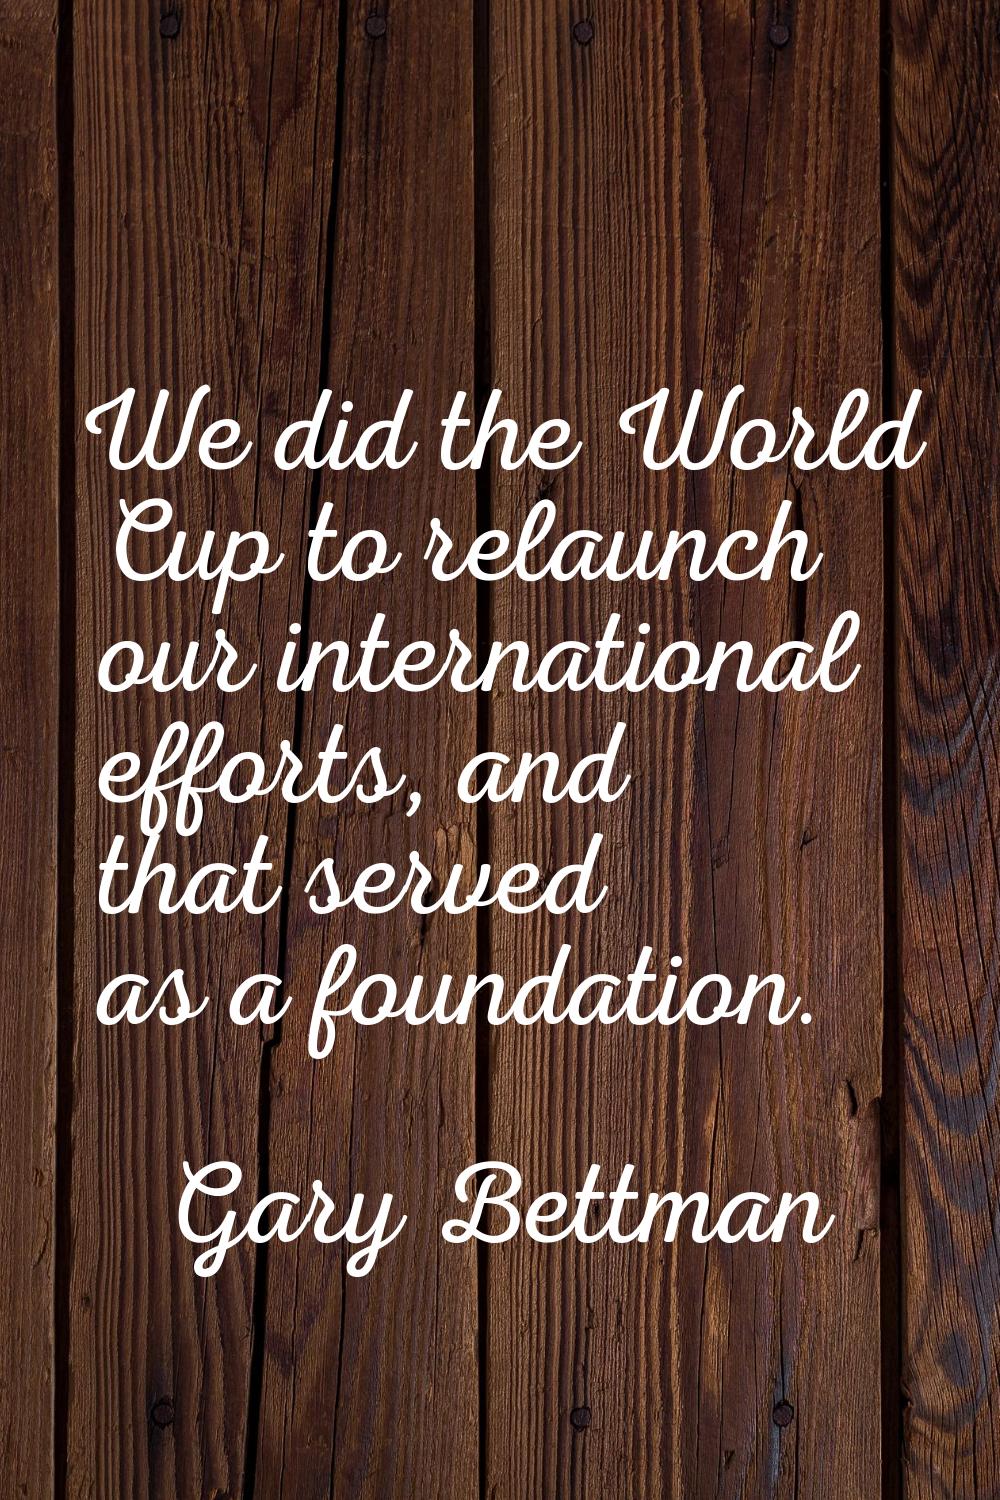 We did the World Cup to relaunch our international efforts, and that served as a foundation.